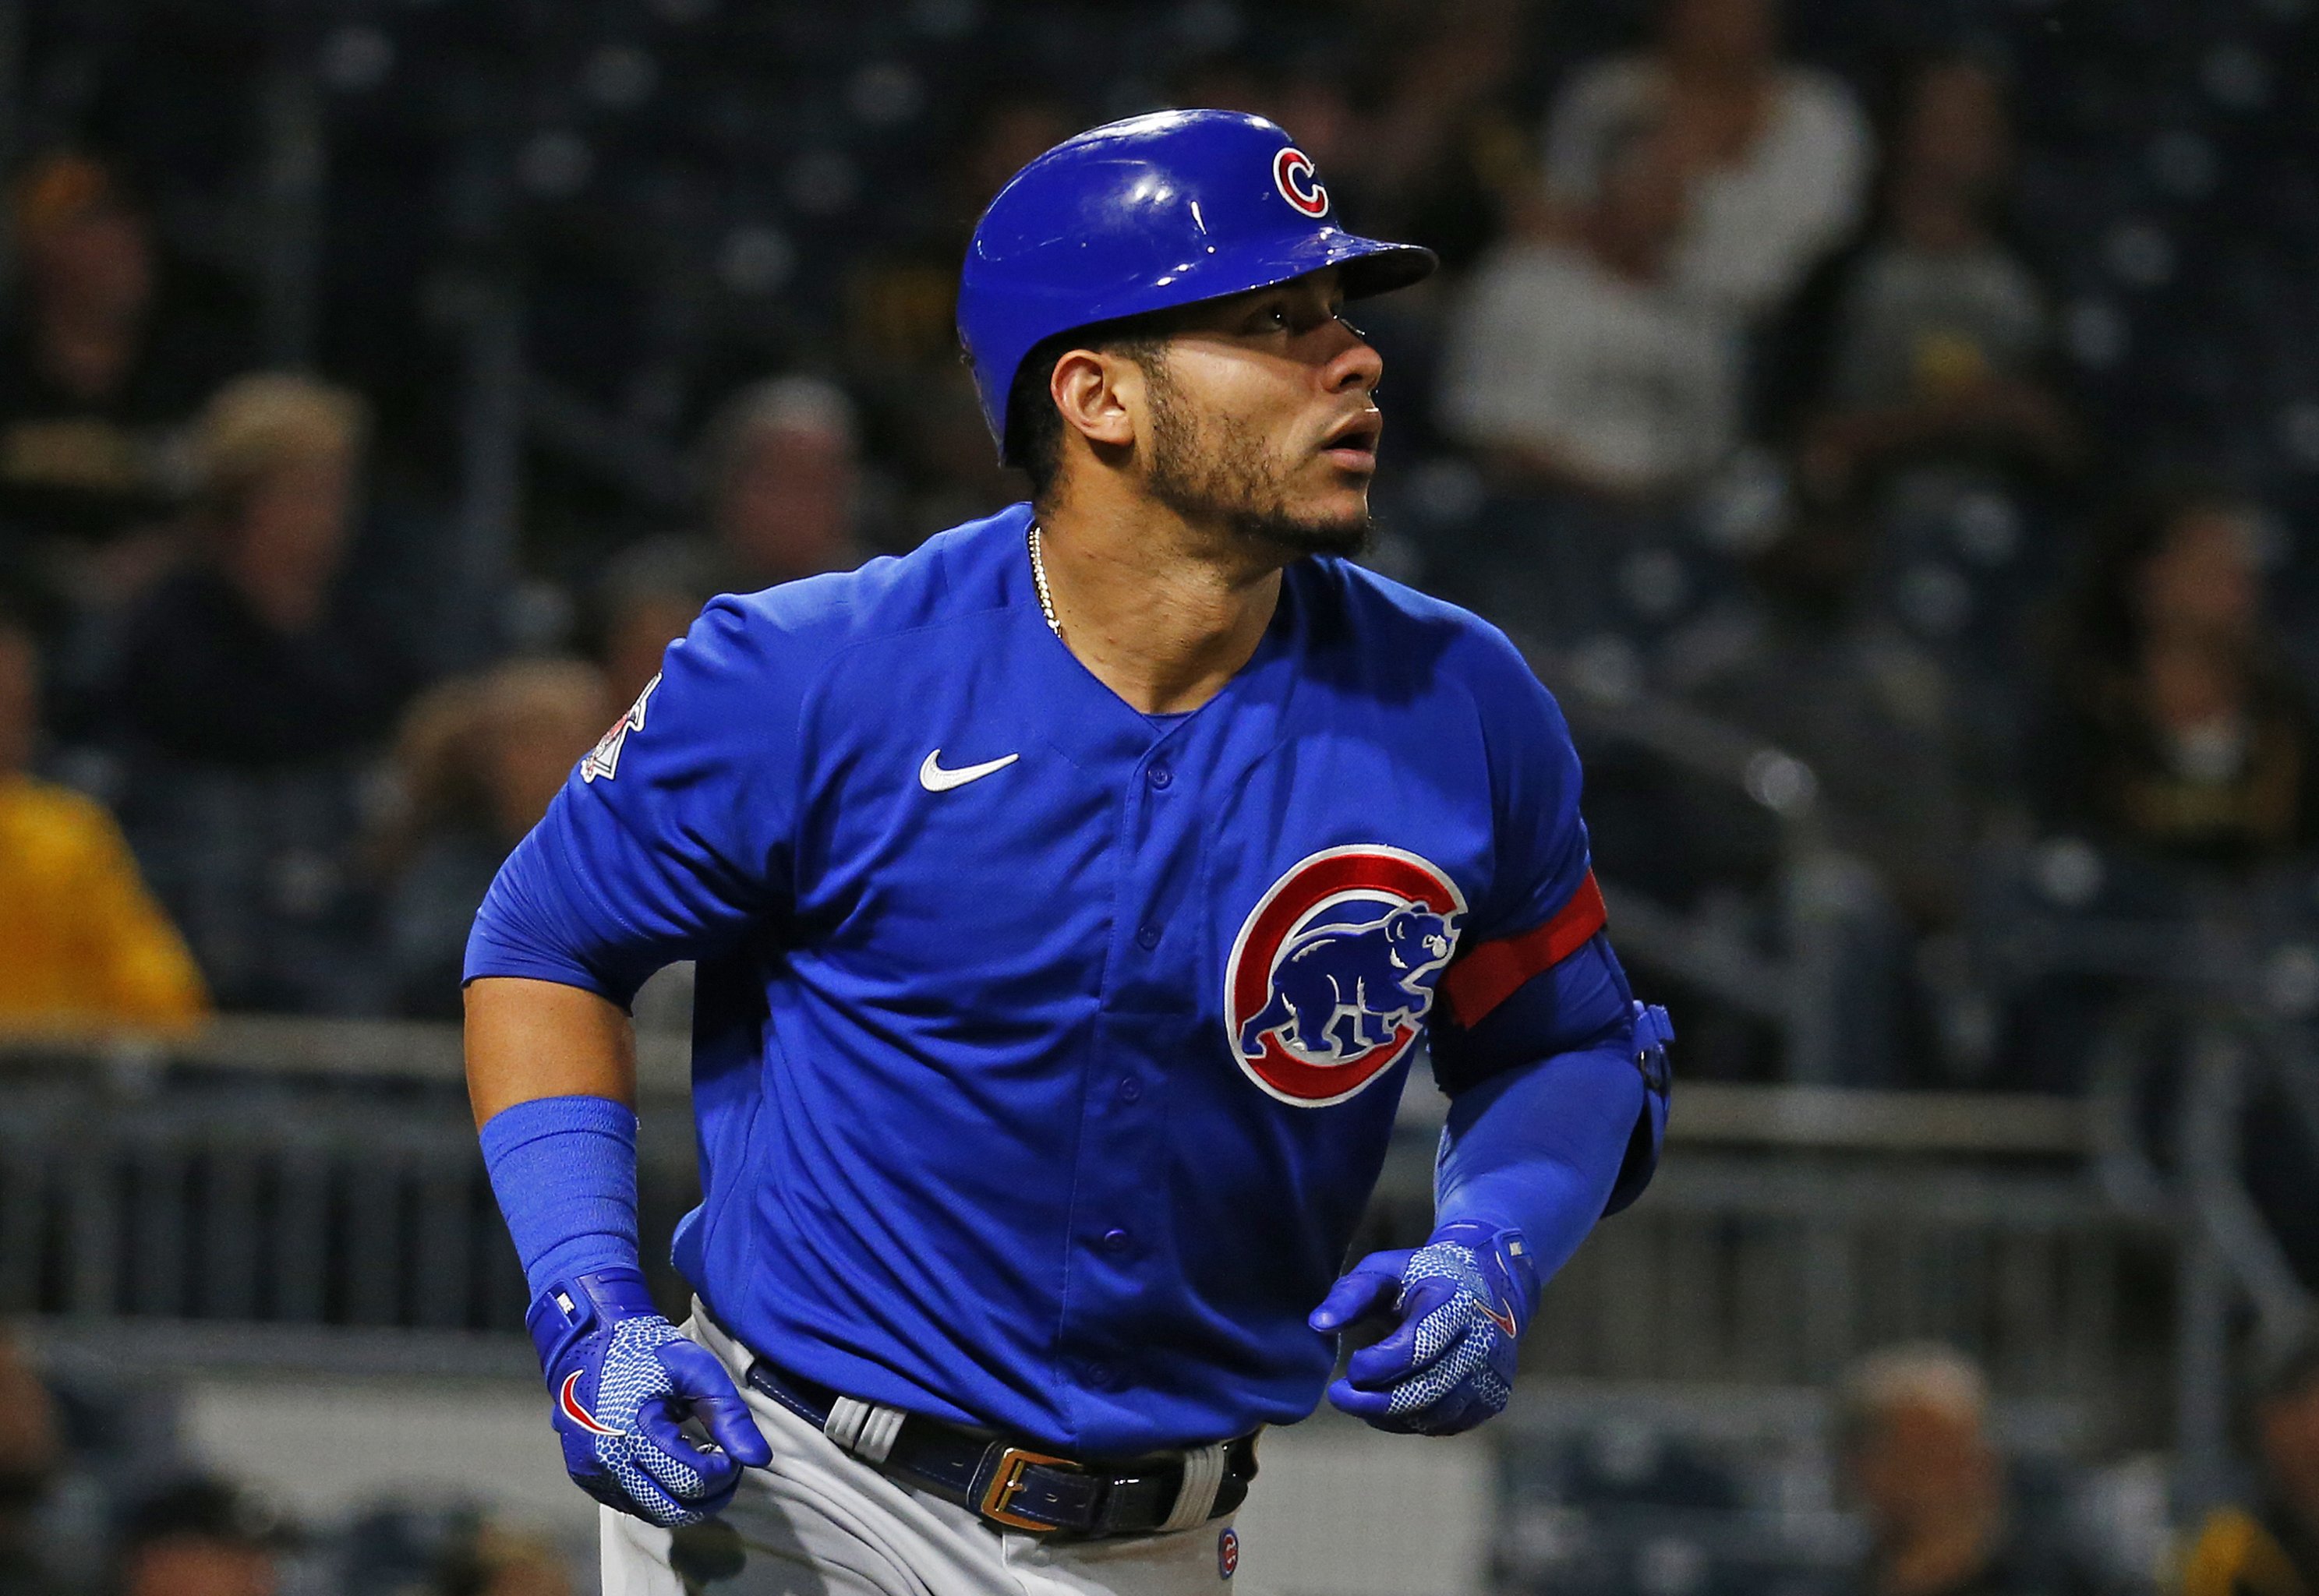 Willson Contreras Got Fined After the Game Where the Brewers Plunked Him  Again and He Got Ticked - Bleacher Nation